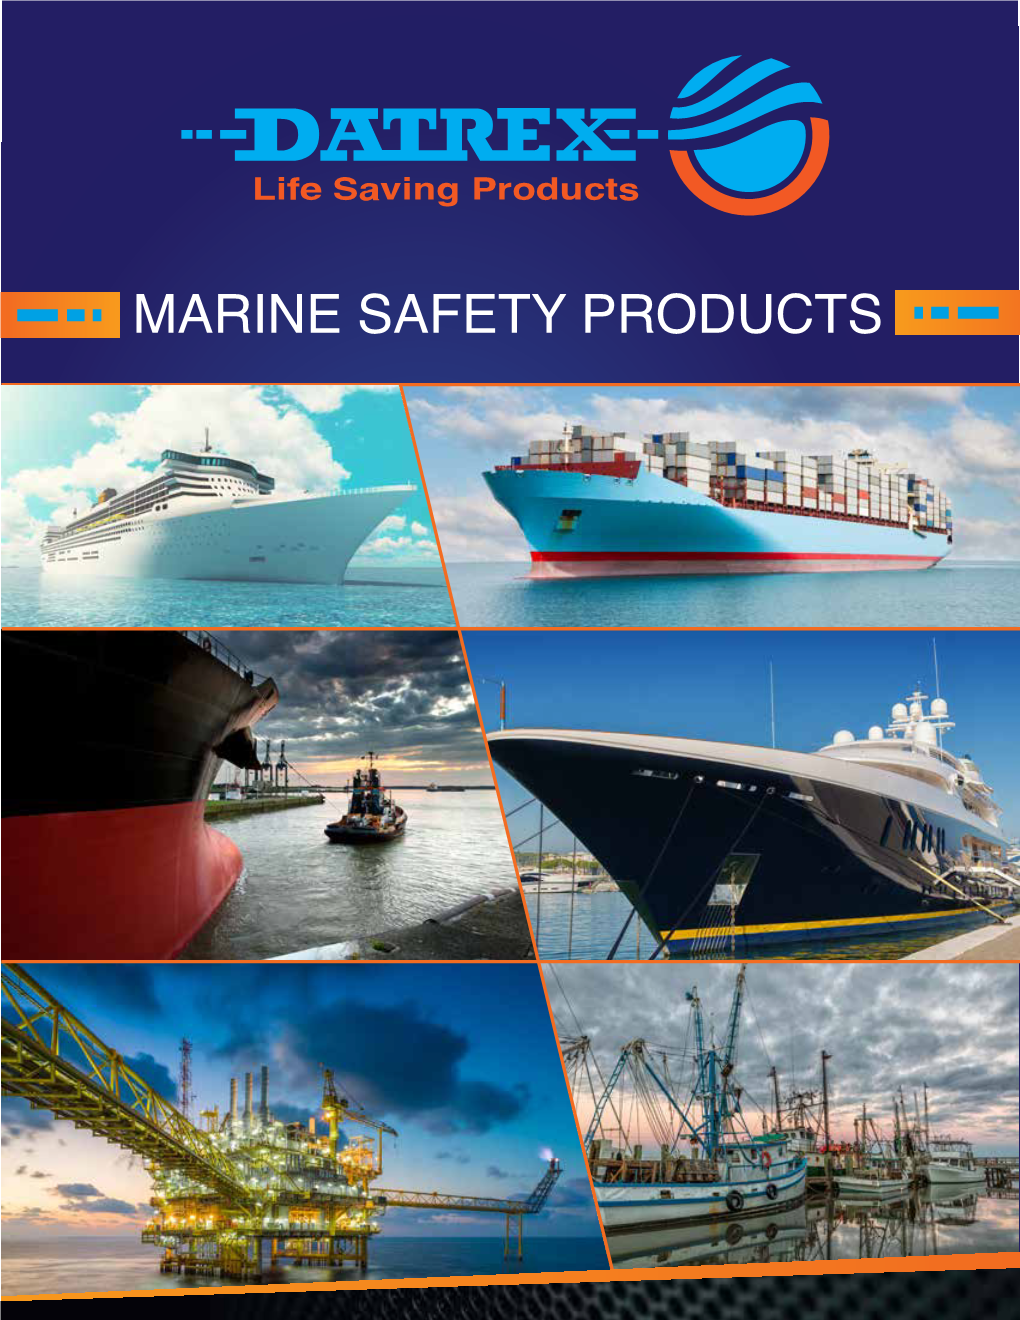 MARINE SAFETY PRODUCTS Established in 1970, Datrex Wishes to Thank All of Our Esteemed Customers and Colleagues Who Have Contributed to Our Ongoing Success